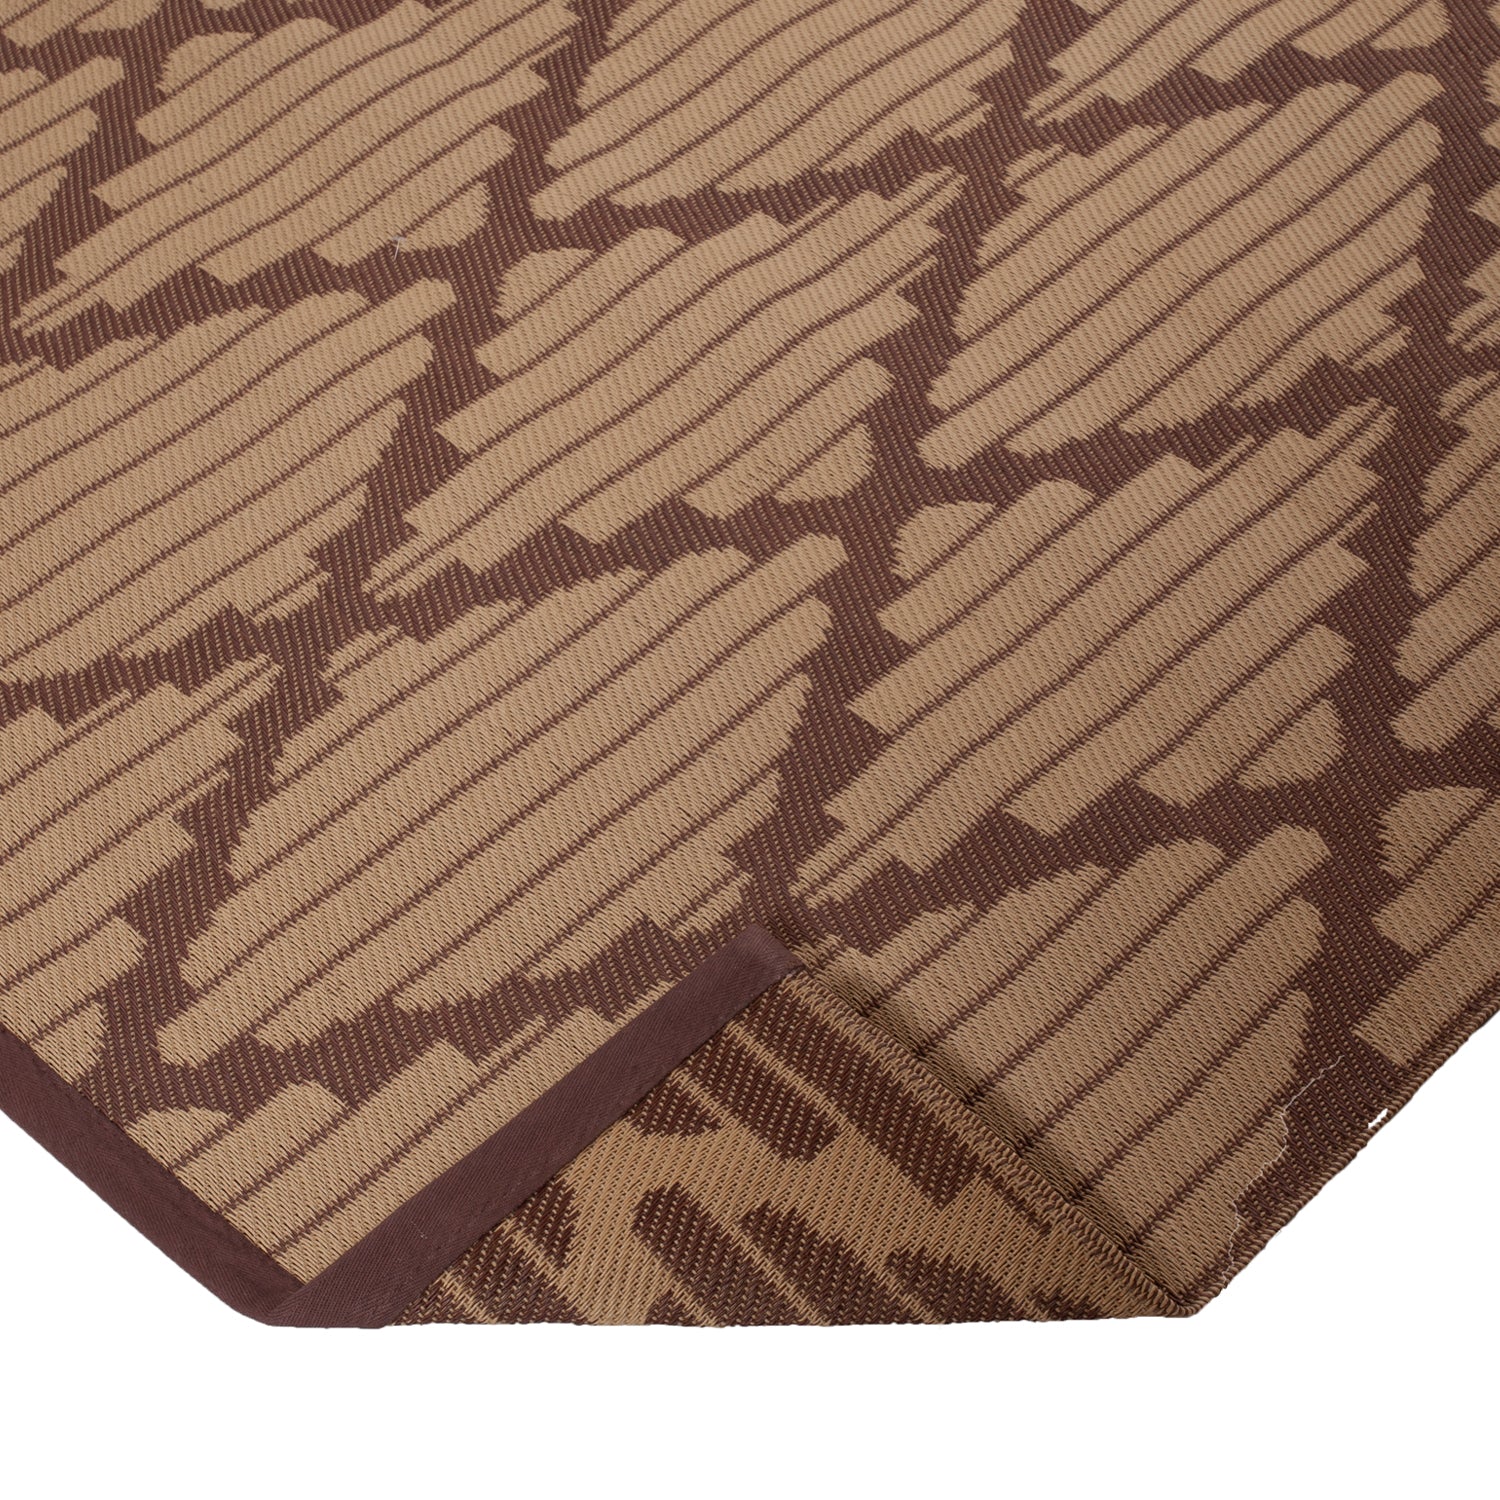 Close-up of textured fabric with geometric pattern in shades of brown.